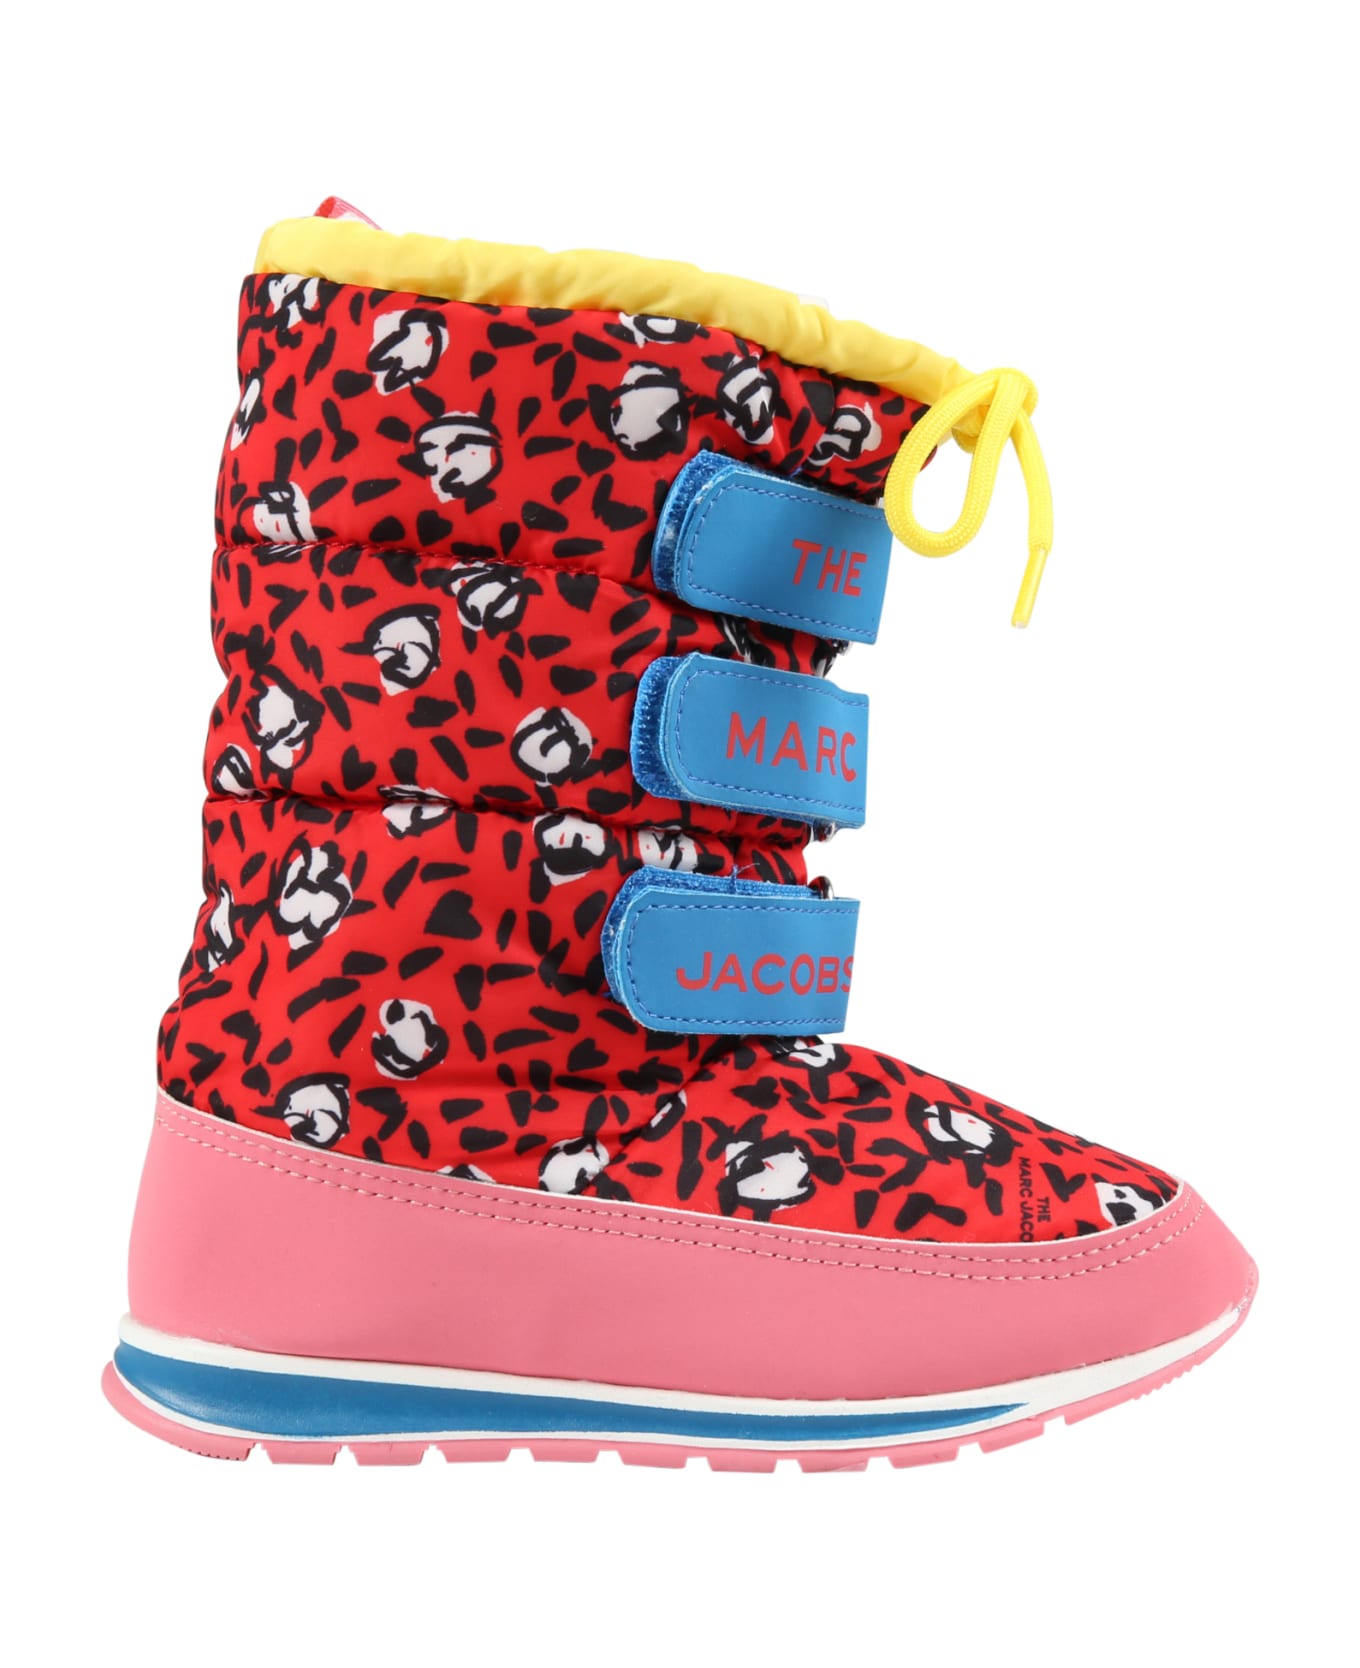 Marc Jacobs Red Snow Boots For Girl - Red